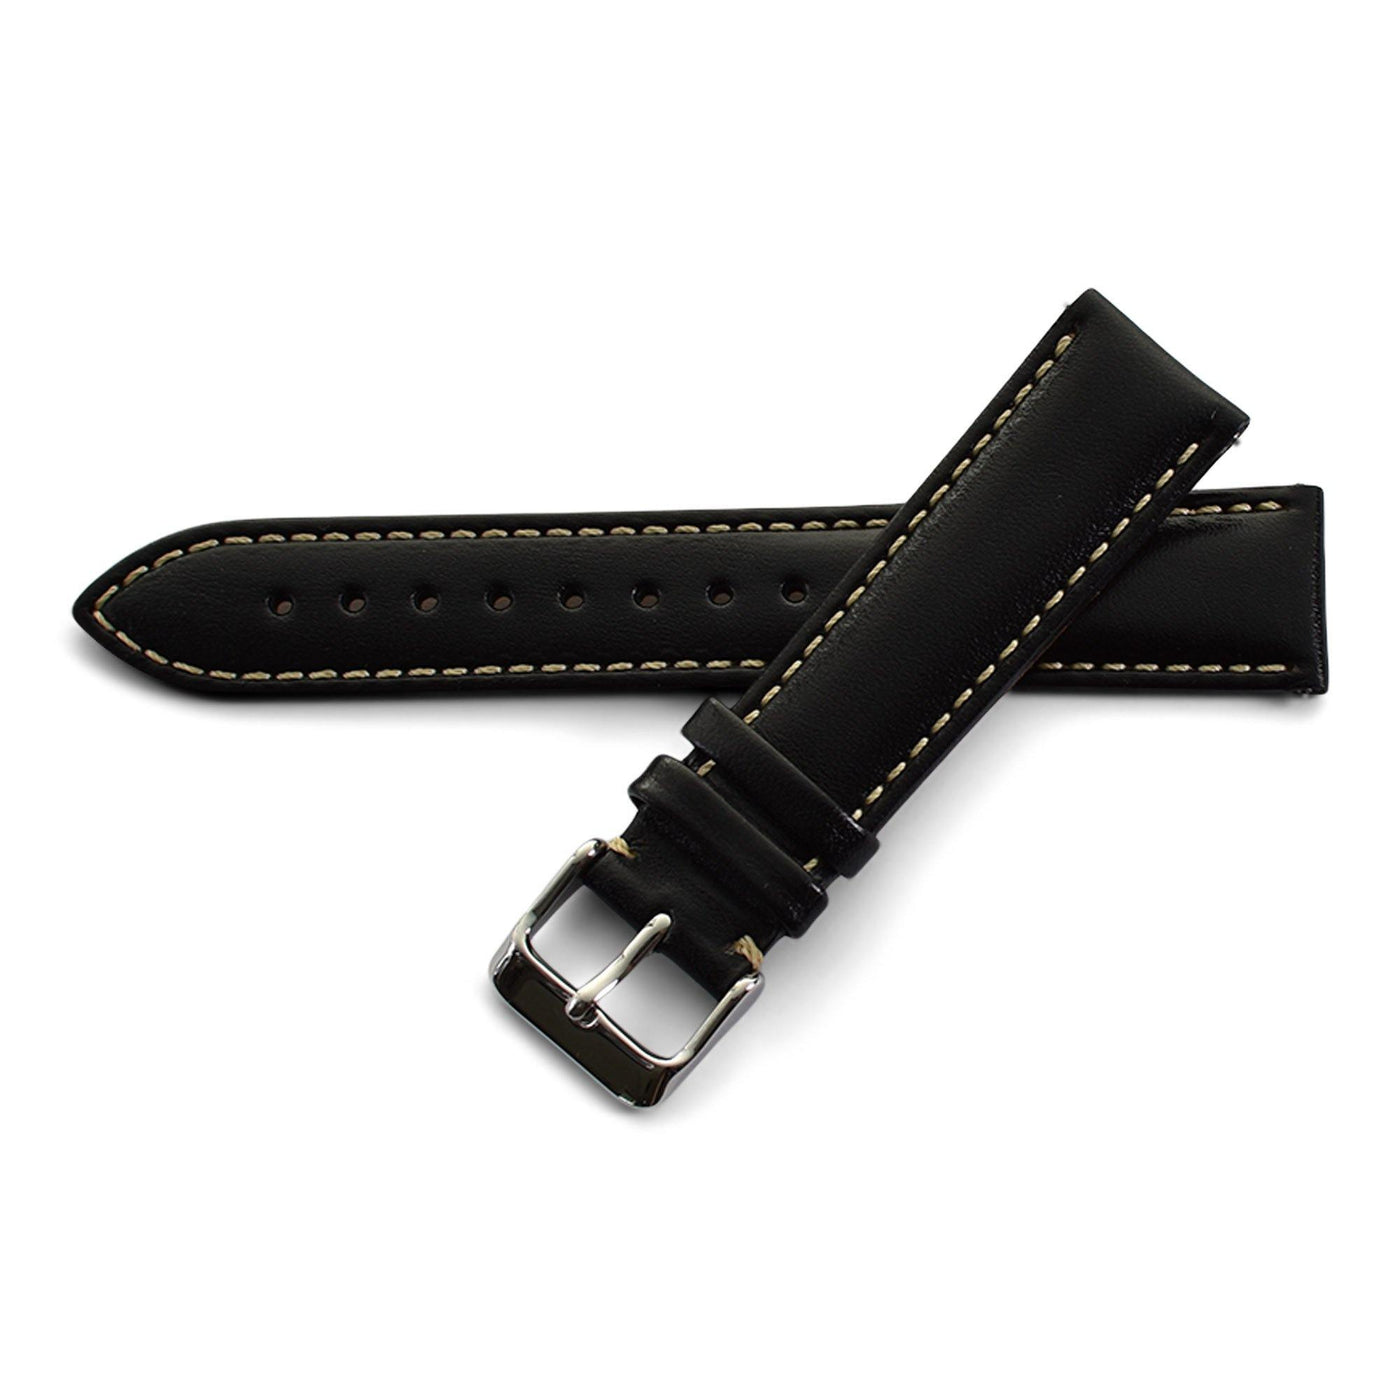 THE CHELSEA QUICK RELEASE BLACK - The Sydney Strap Co.